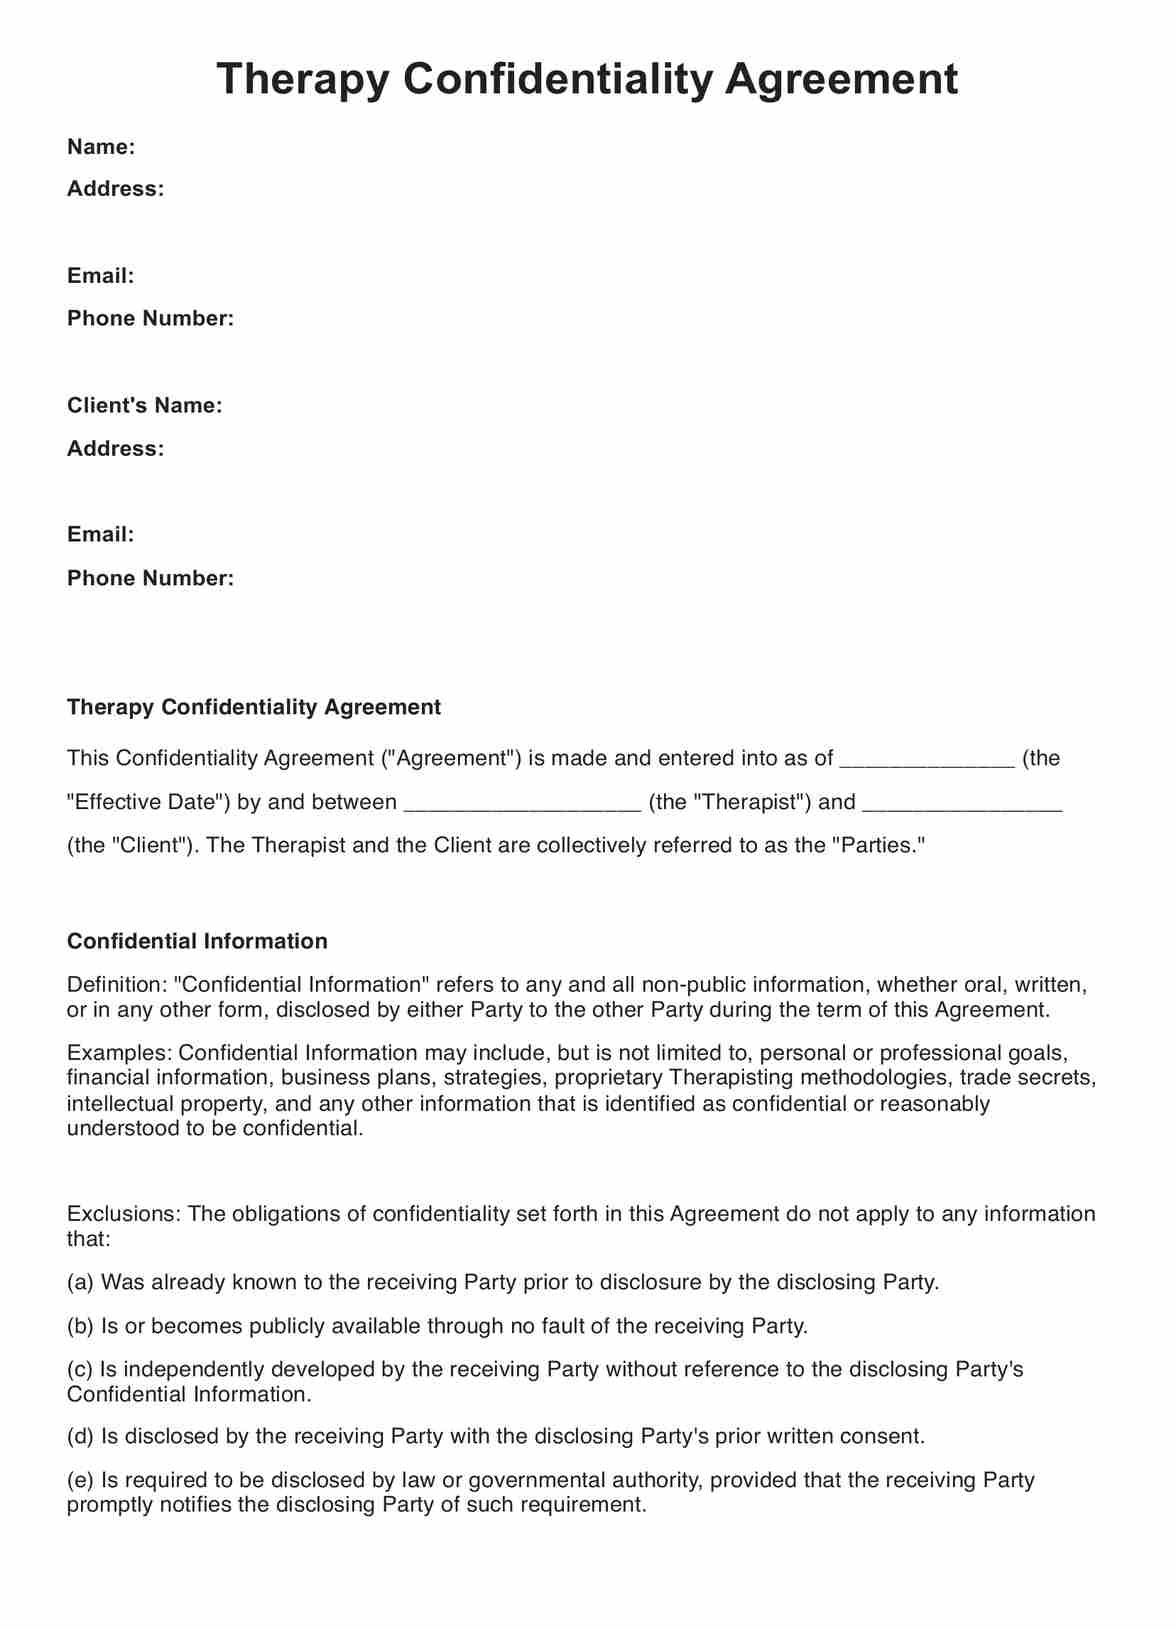 Therapy Confidentiality Agreement PDF Example